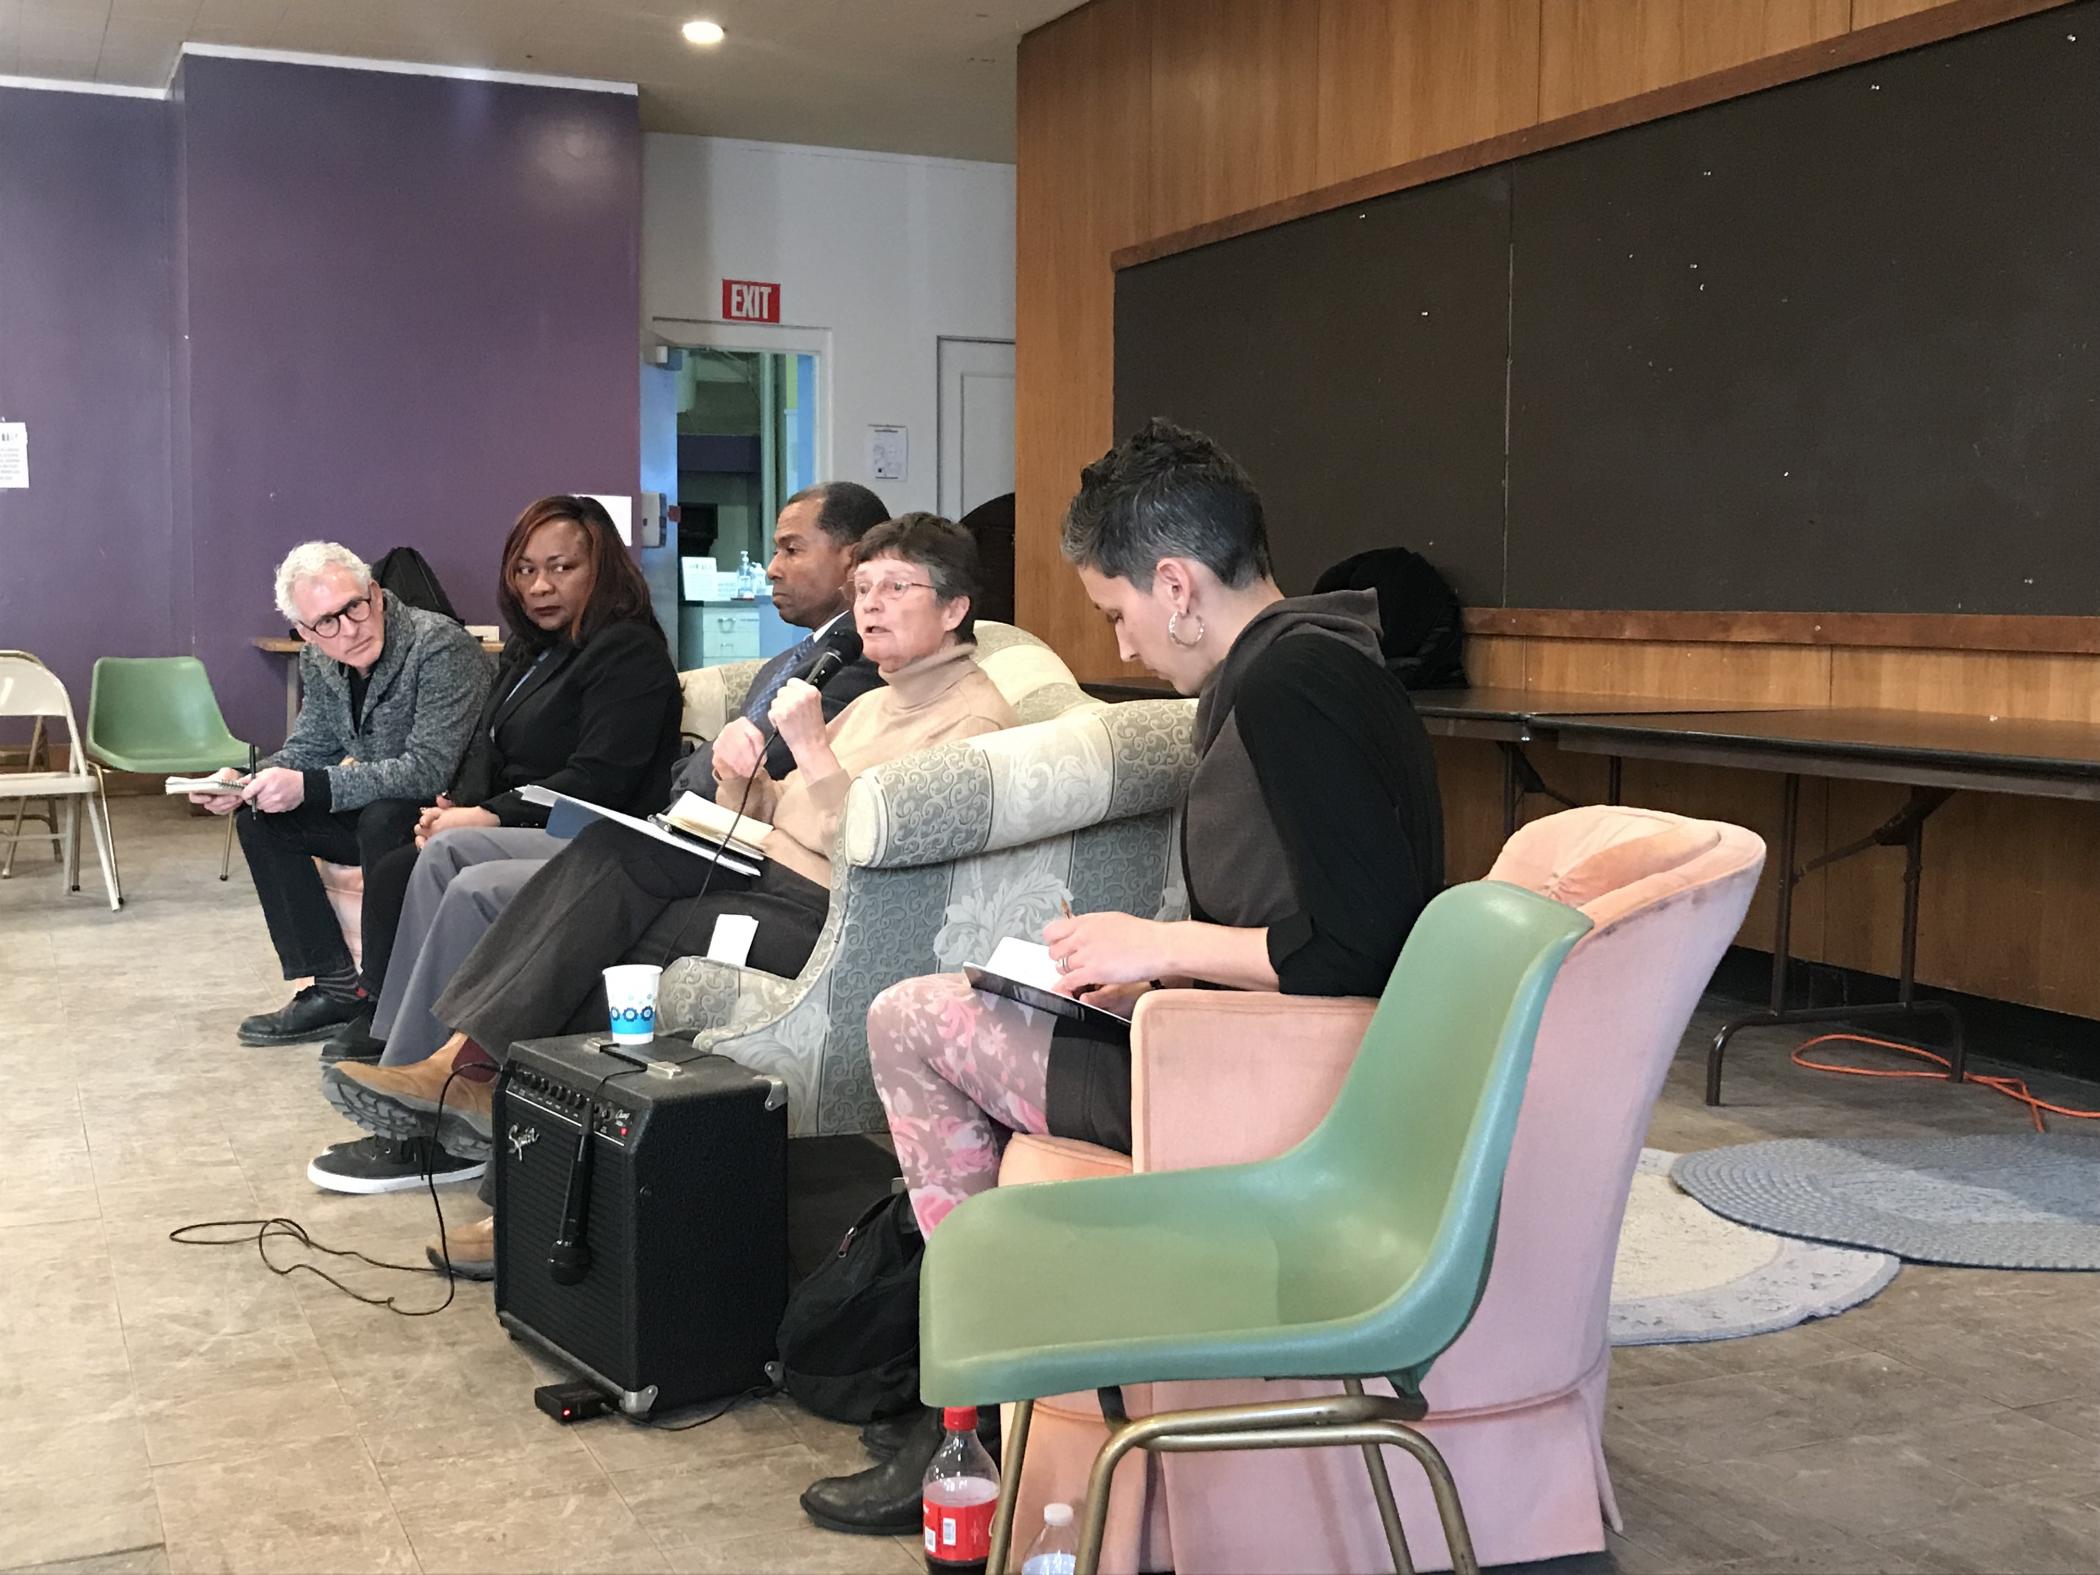 Five discussants, on in a pink armchair and four on a gray and white couch, sit in a line in front of a blank chalk board. One participant holds a microphone to speak while the others look at her or their own notes